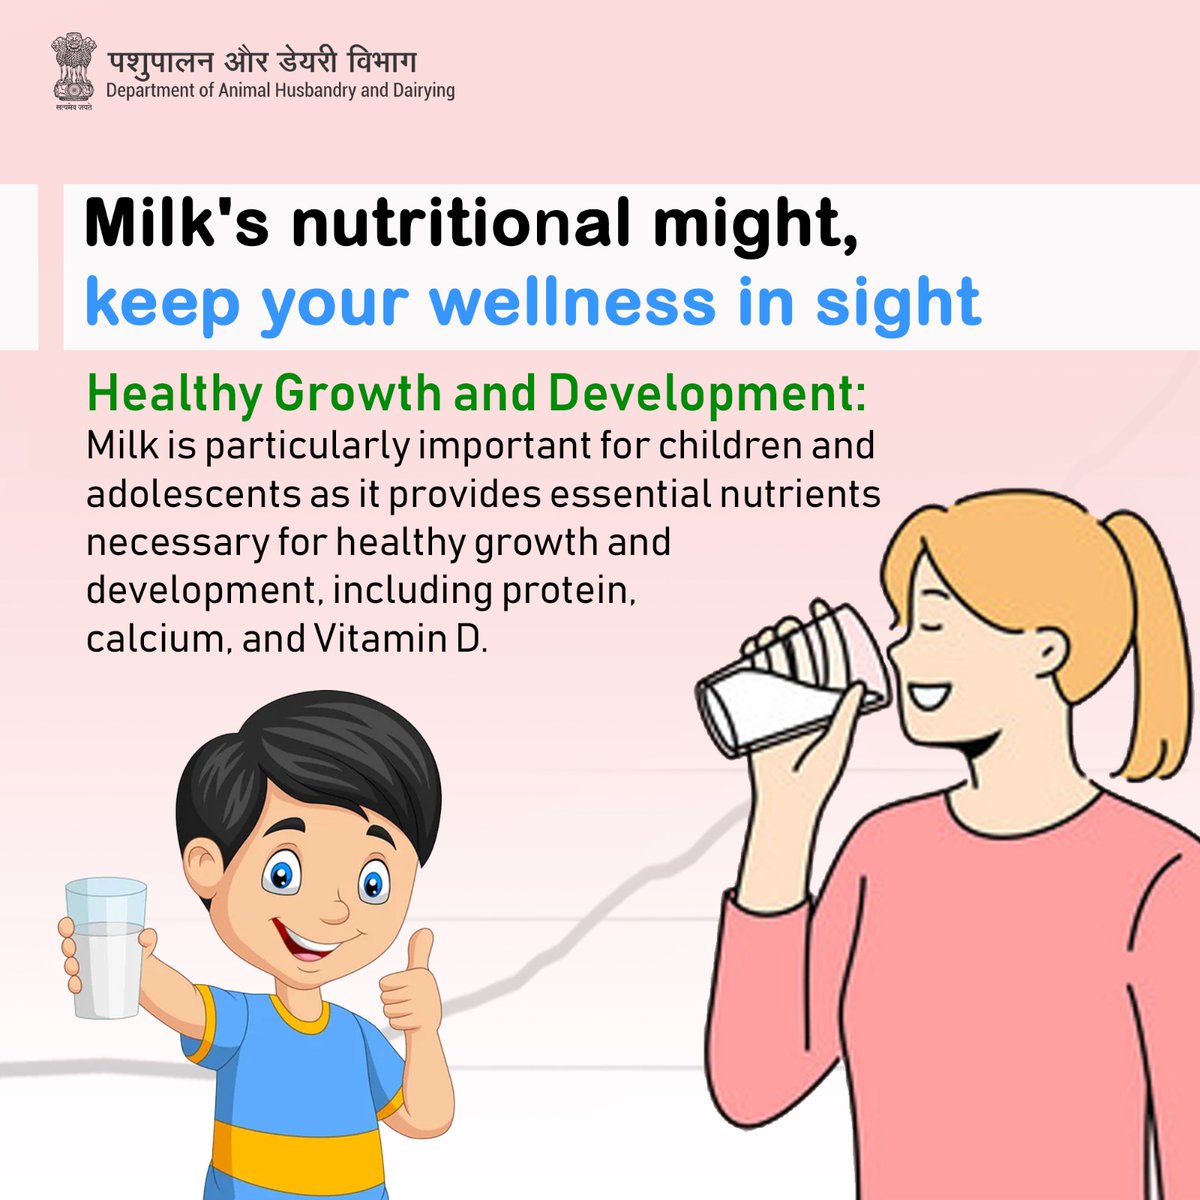 Nurturing Growth: Milk's Vital Role! 
Packed with Protein, Calcium, and Vitamin D, it Fuels Healthy Development in Children and Adolescents. 
#HealthyKids #MilkBenefits